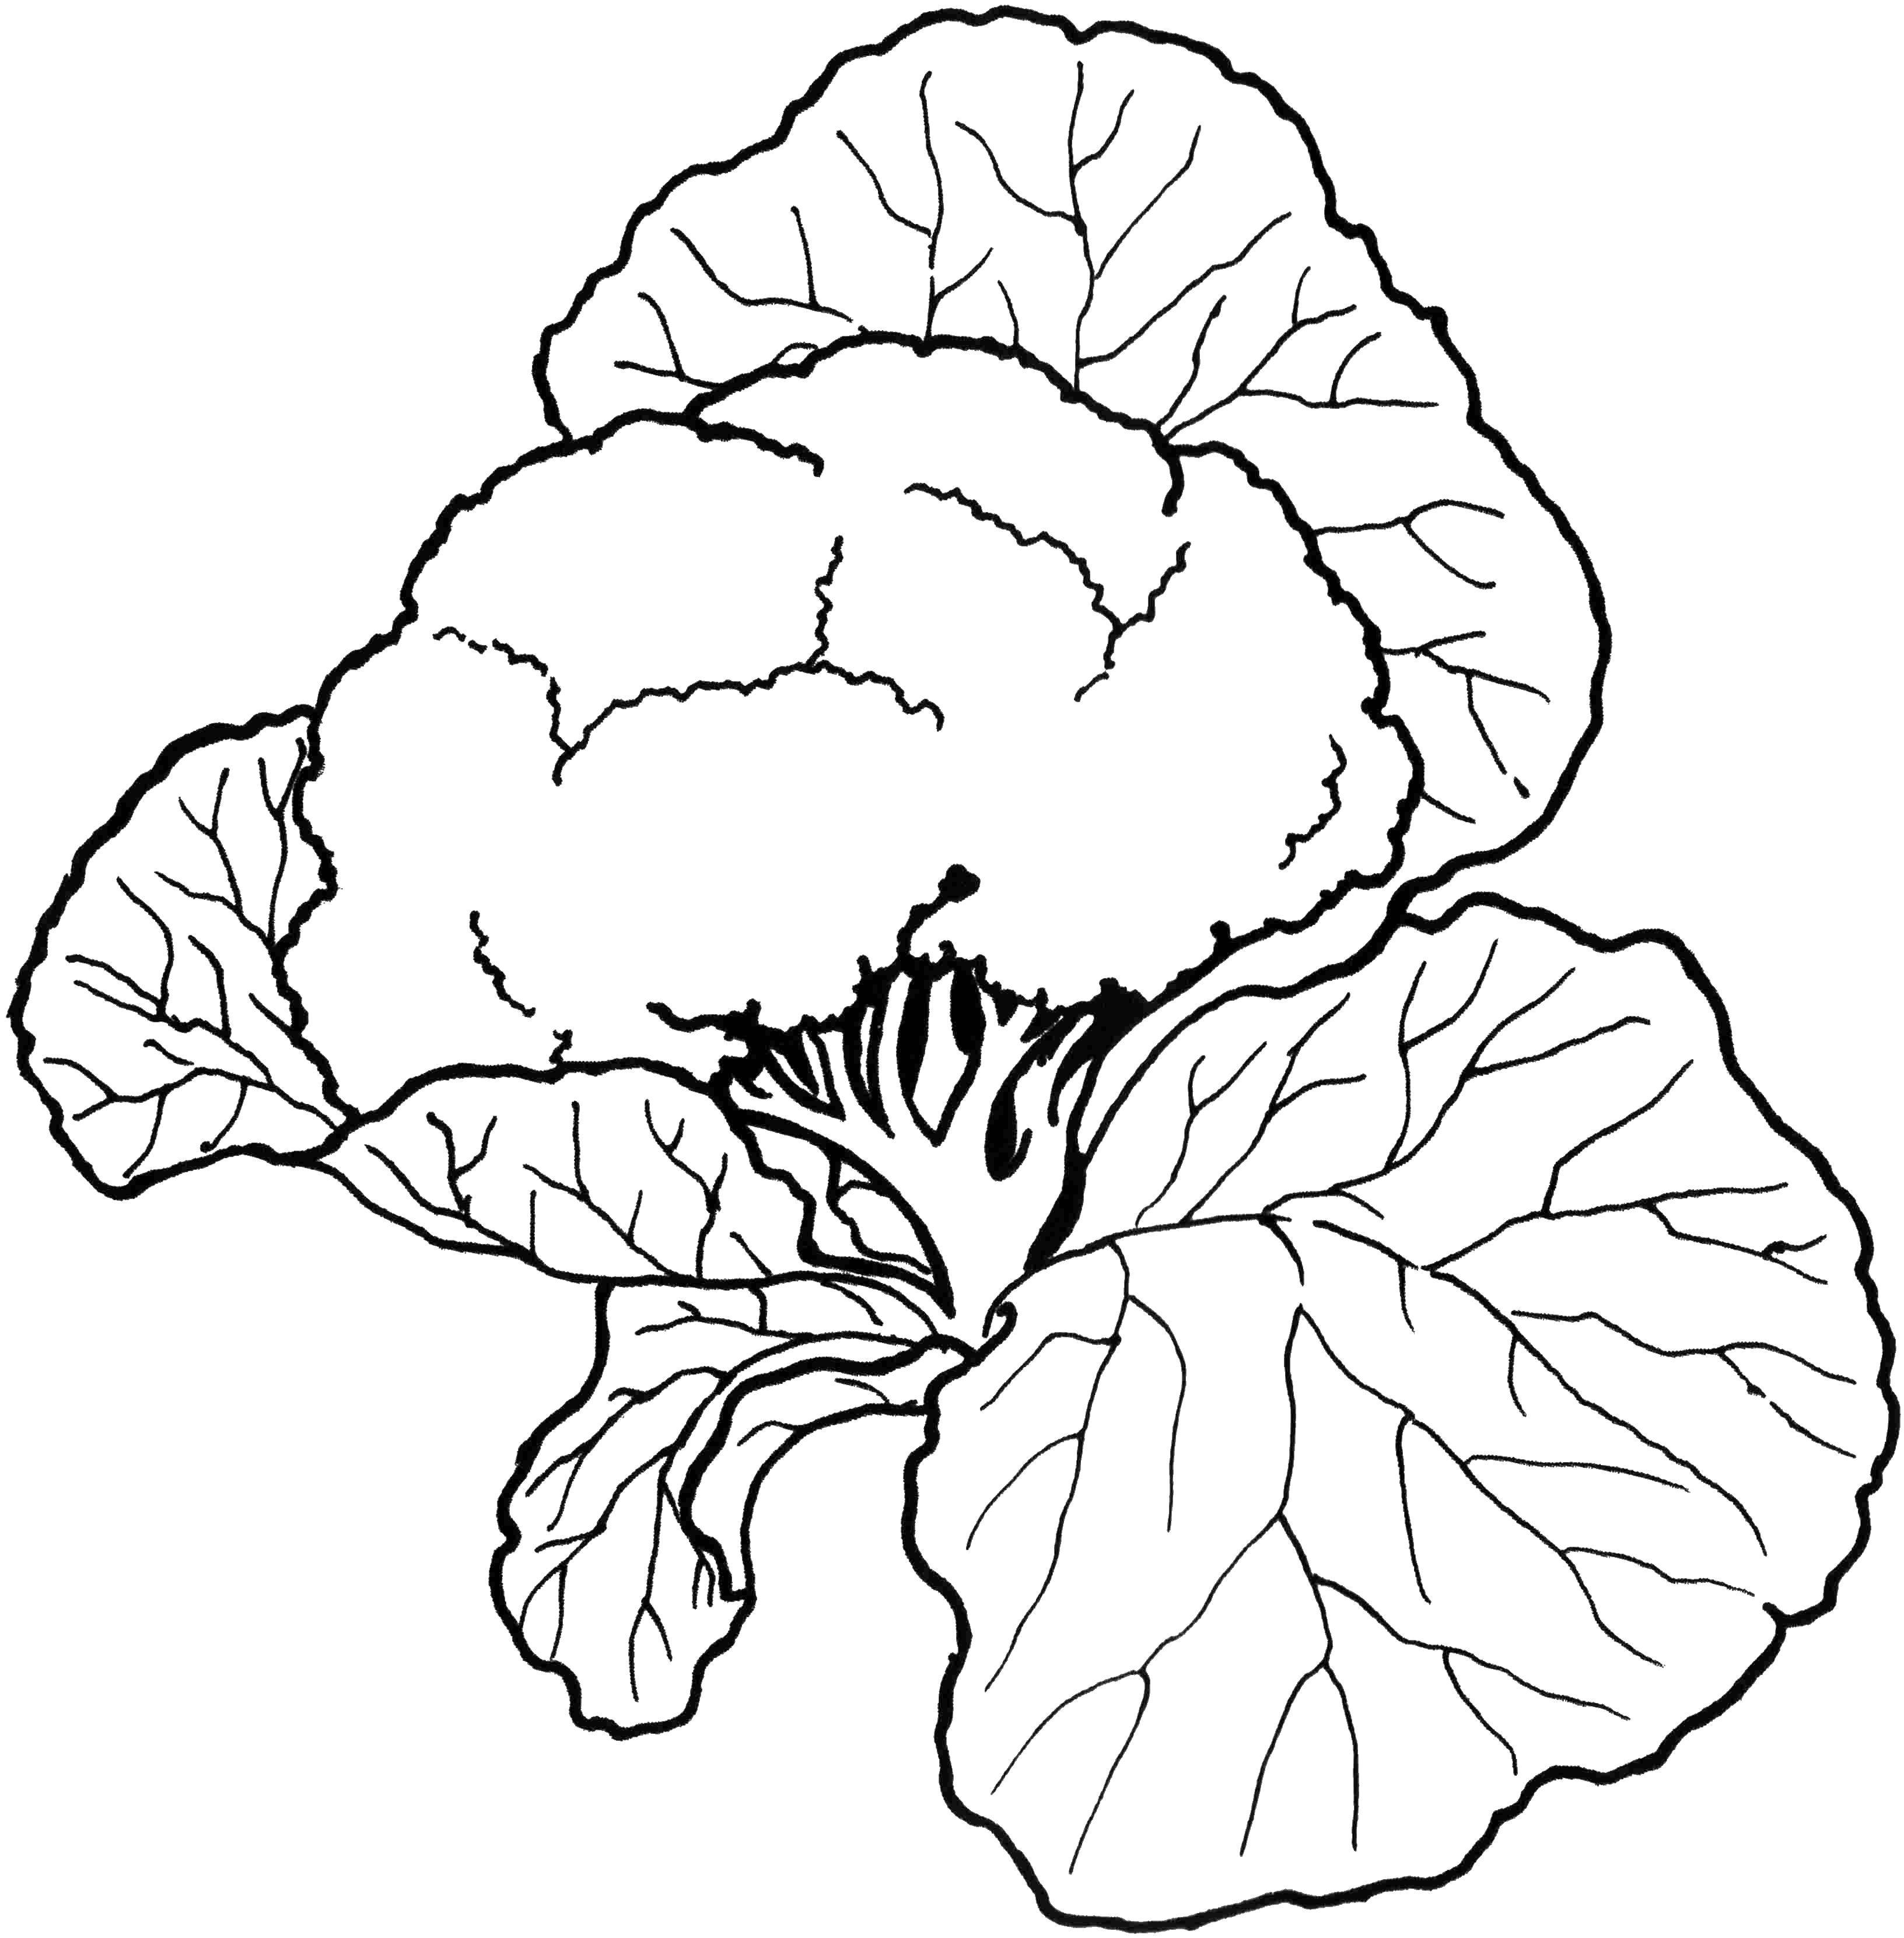 Coloring Cauliflower.. Category Vegetables. Tags:  cauliflower, vegetables.